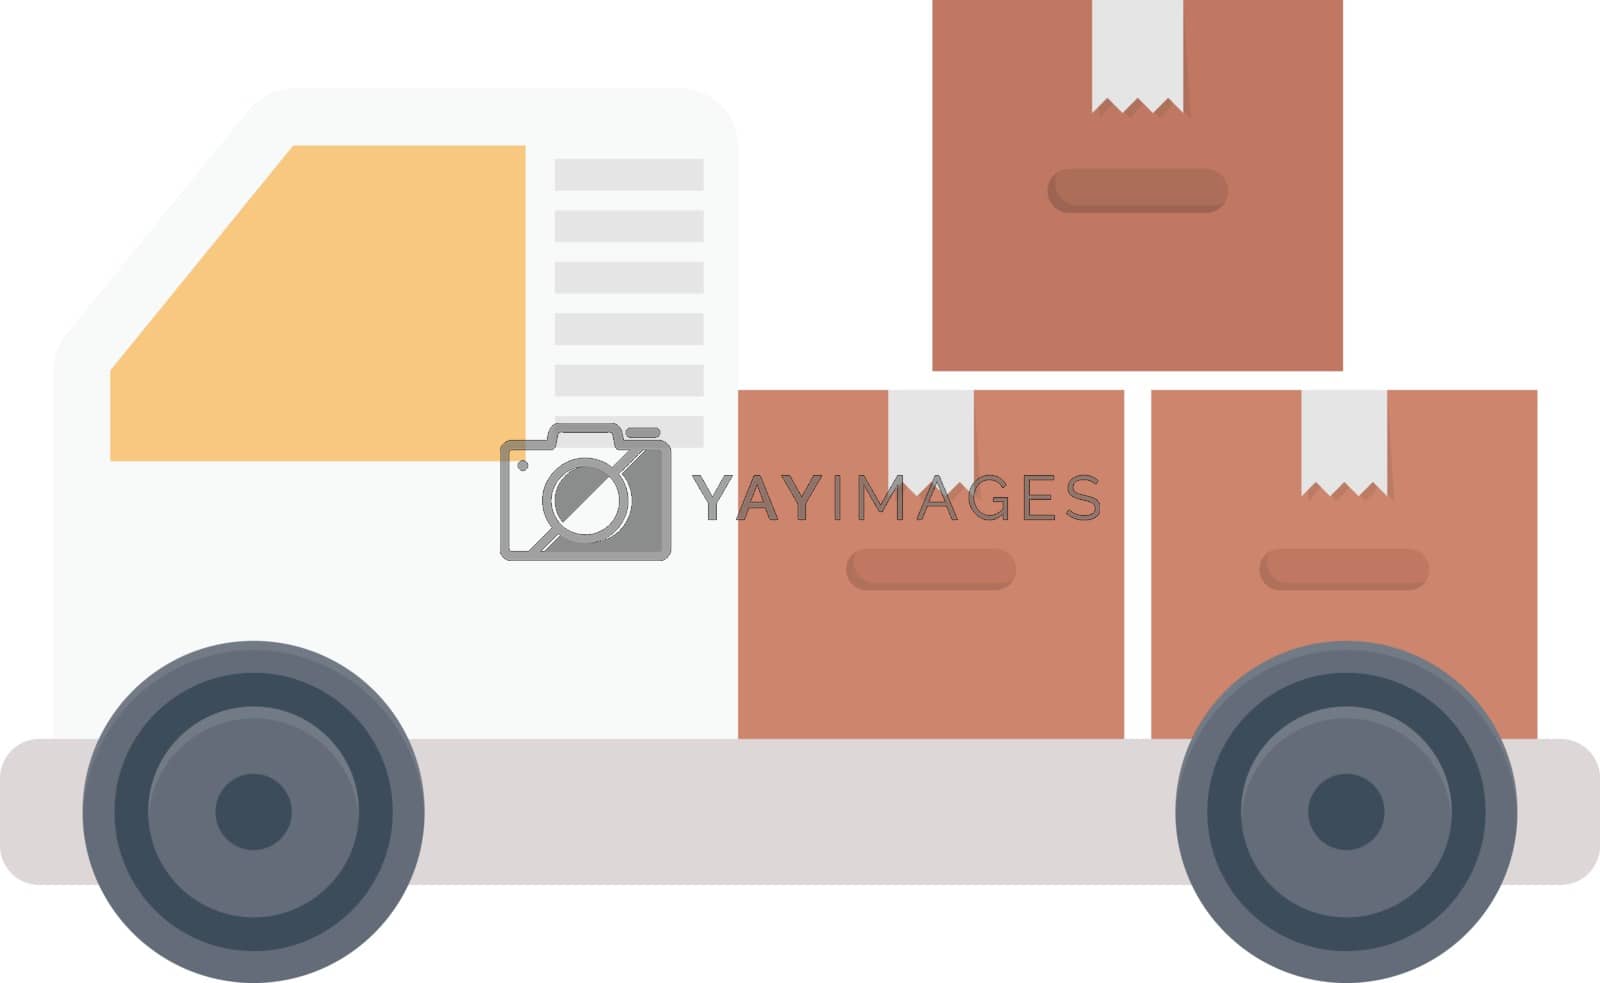 Royalty free image of shipping by vectorstall